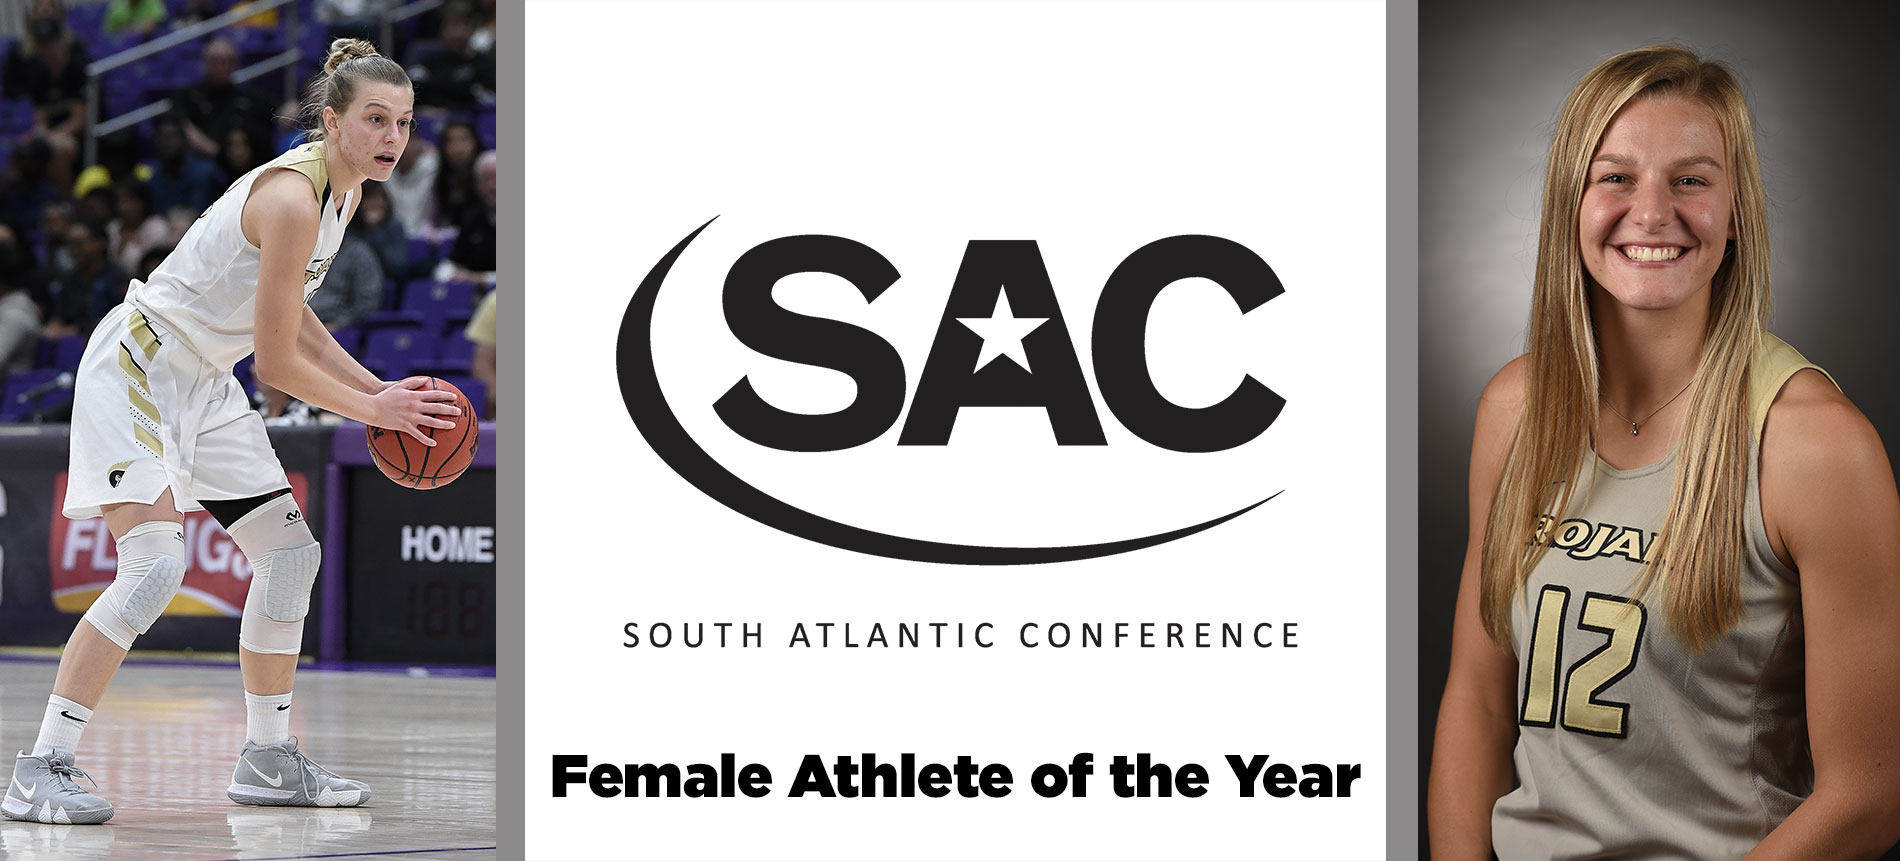 Mollenhauer Named South Atlantic Conference Female Athlete of the Year